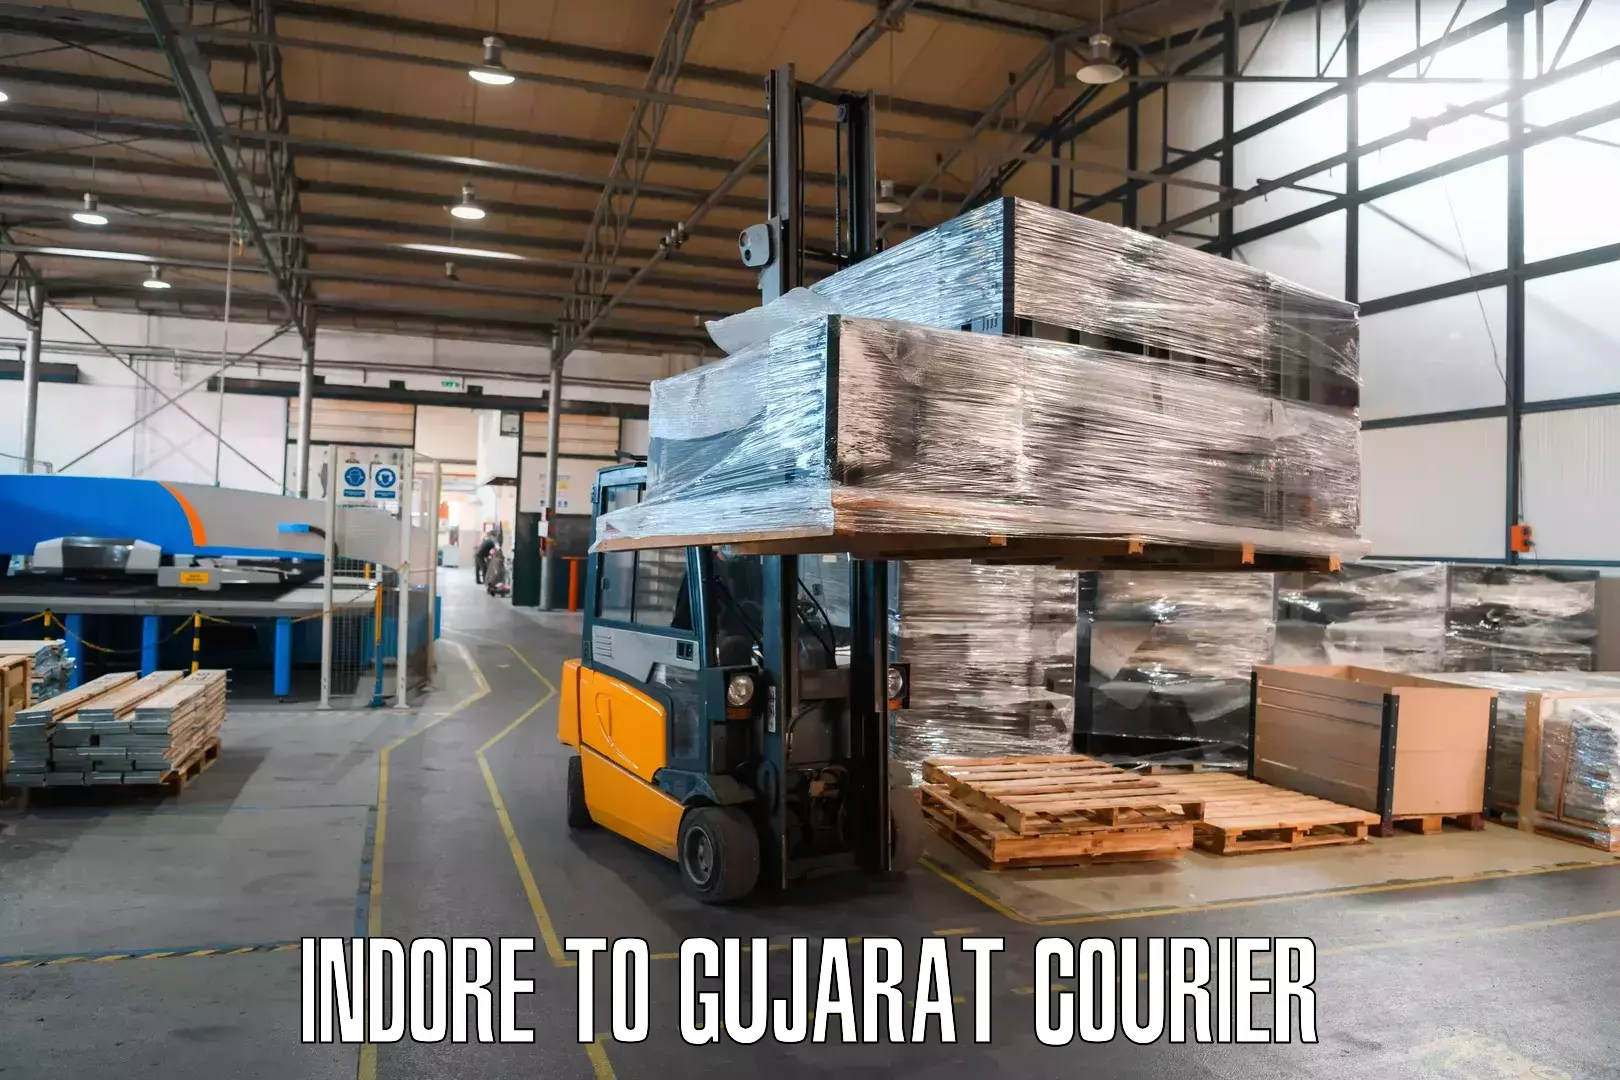 Multi-national courier services Indore to Rajkot